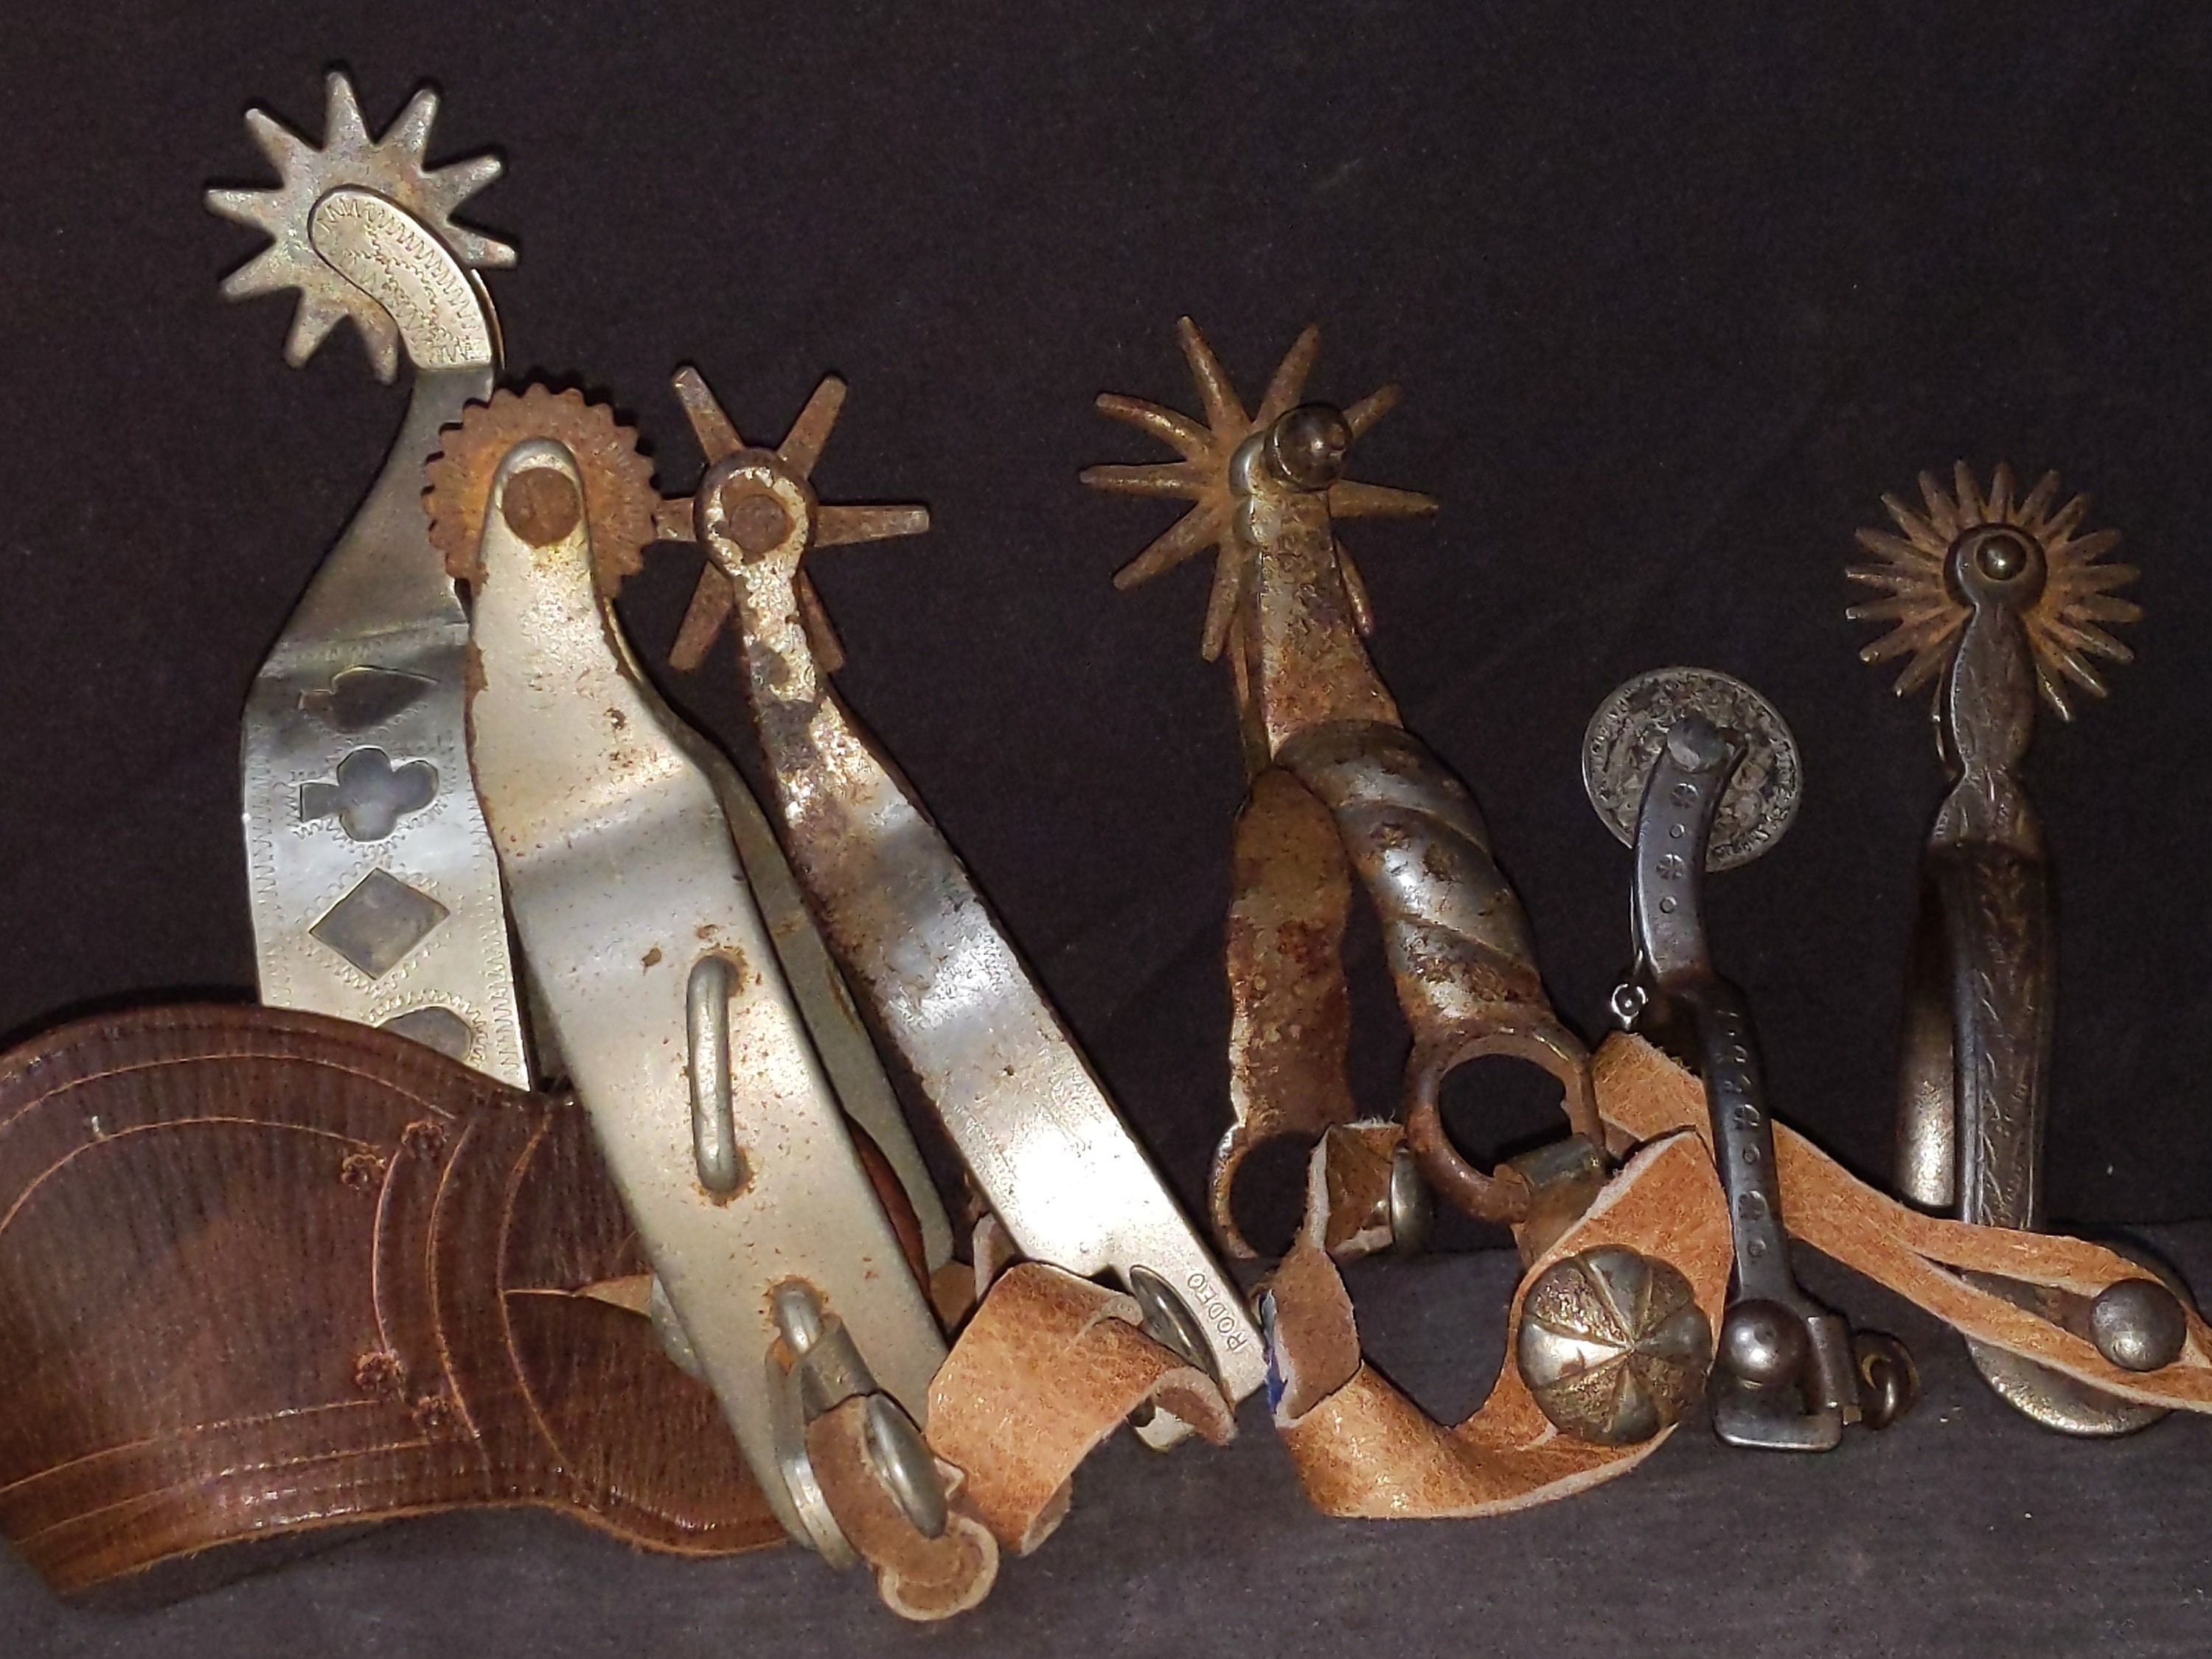 19th Century Republic of Mexico spurs : Tasteful, double-mounted, silver  inlaid, Mexican spurs leathers with 1 ¾” domed solid …